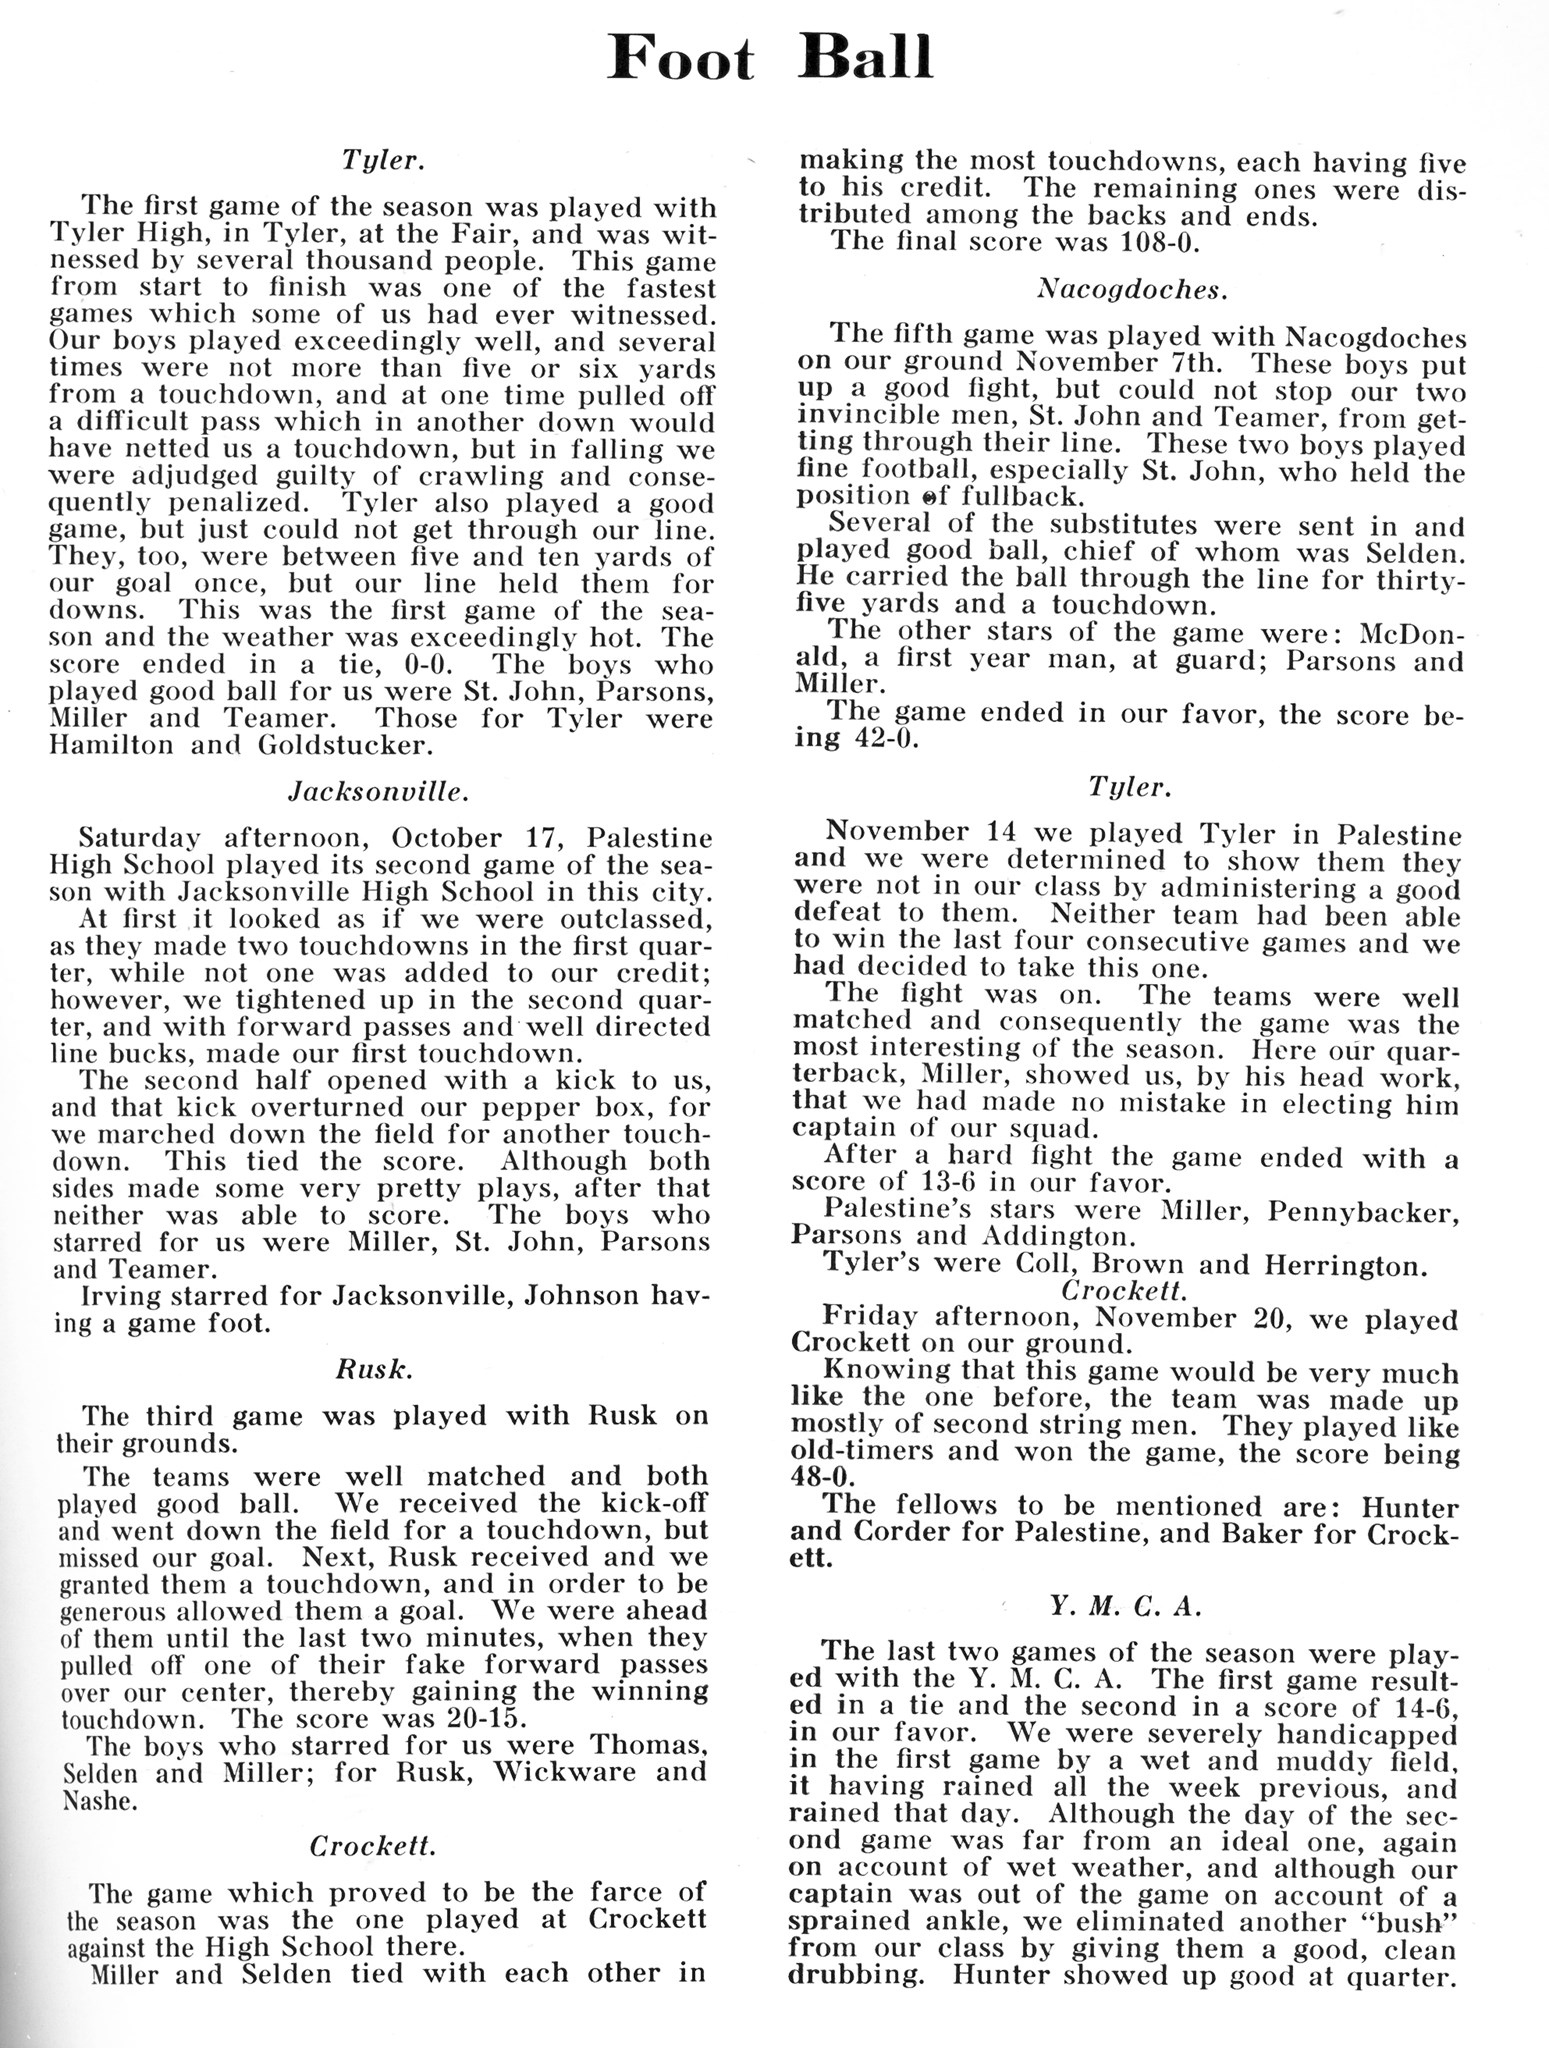 ../../../Images/Large/1915/Arclight-1915-pg0047.jpg